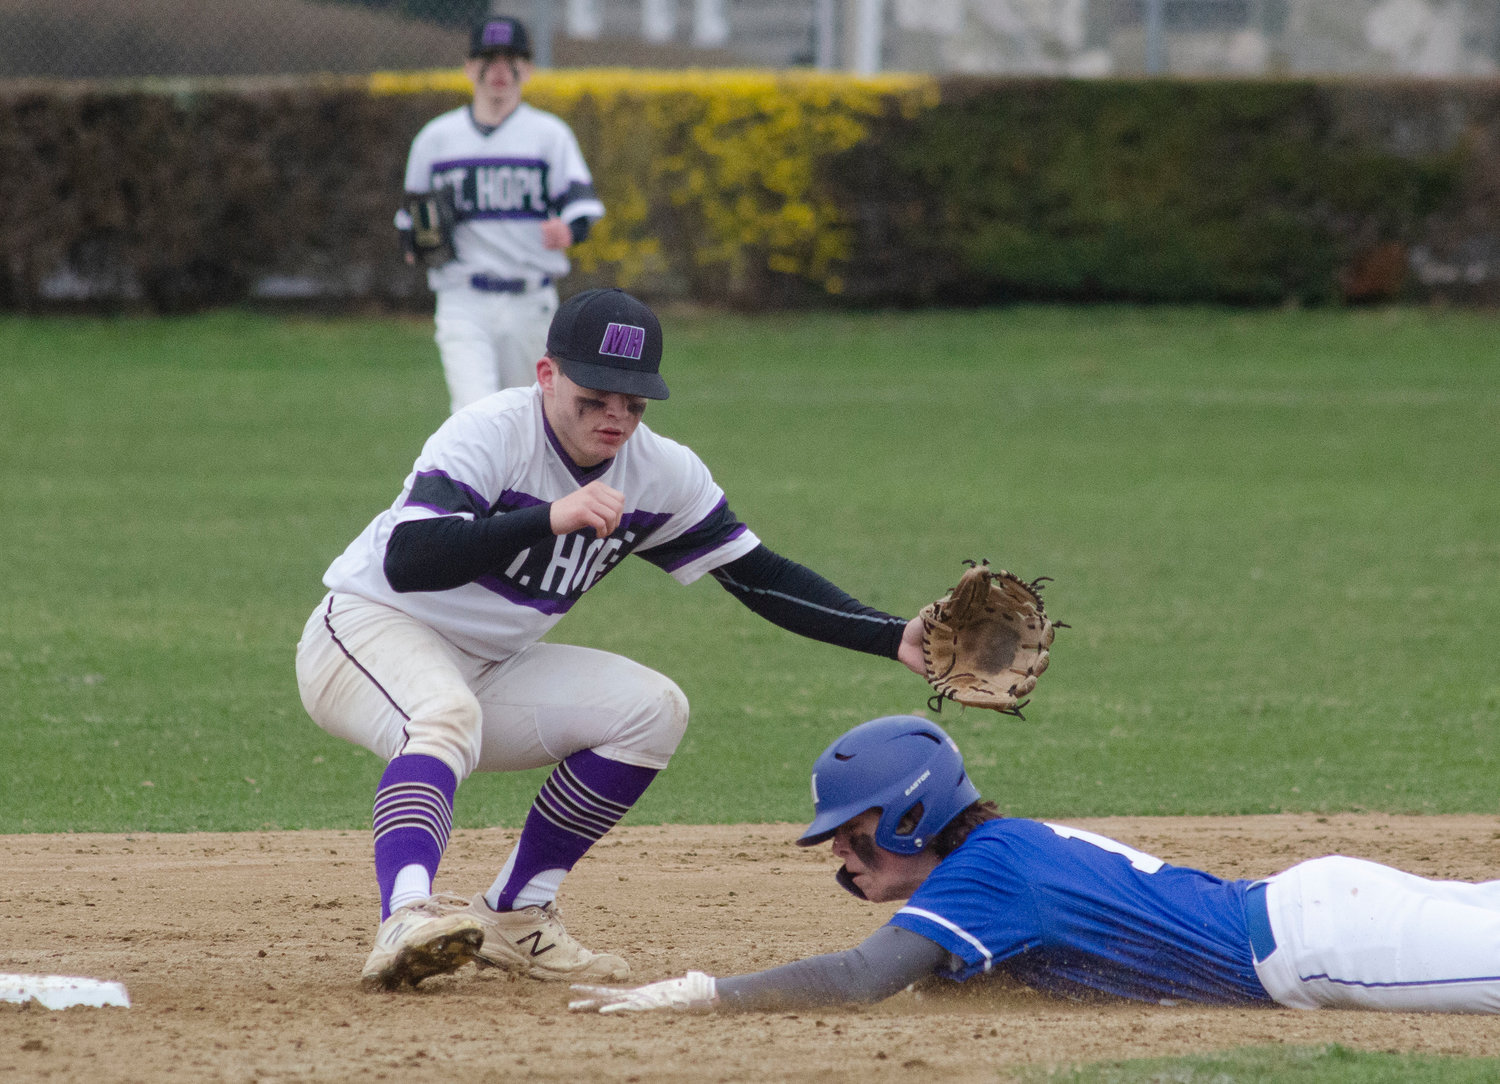 Second baseman Jack Standish fields a throw from catcher Matt Gale as they attempt to stop a Middletown steal. 